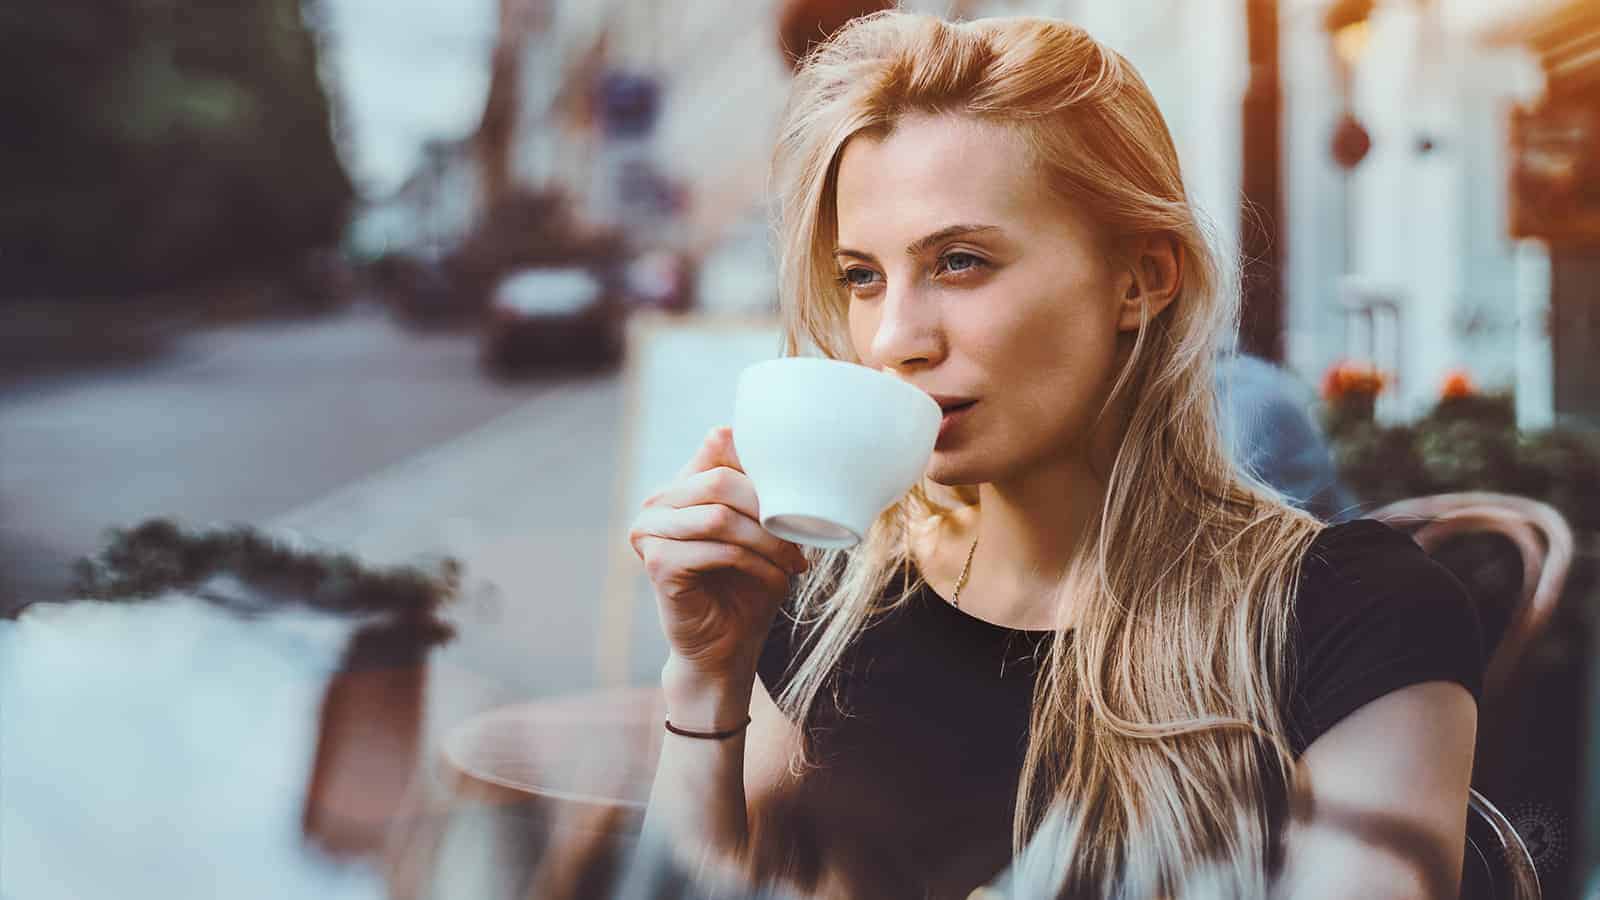 Research Explains Why You Should Drink Coffee After Breakfast (Not Before)